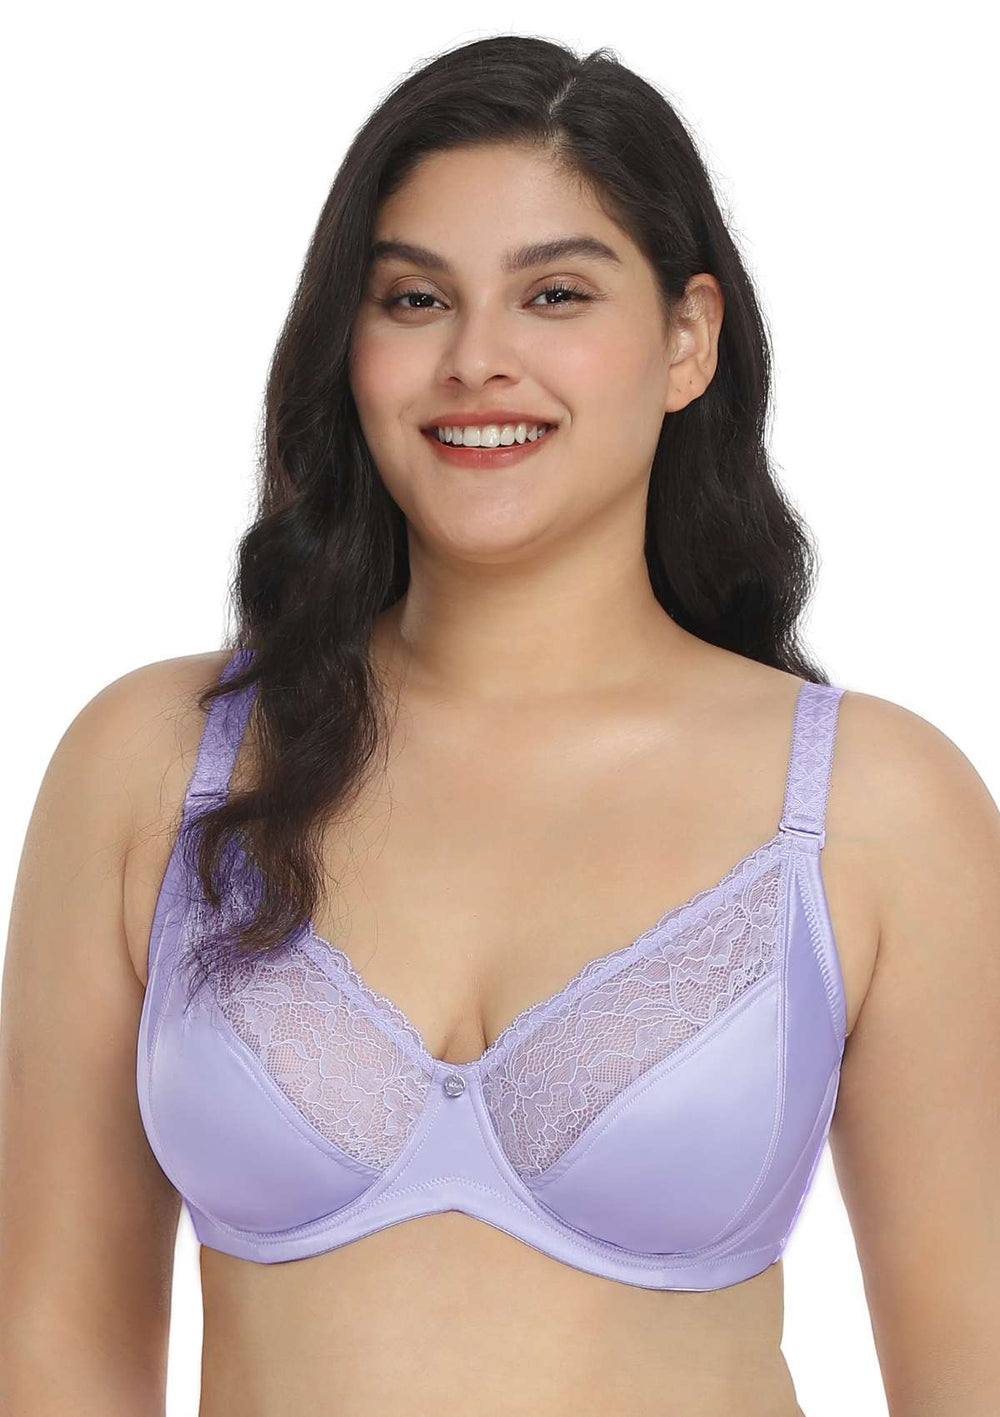 HSIA Foxy Satin Smooth Floral Lace Full Coverage Underwire Bra Set